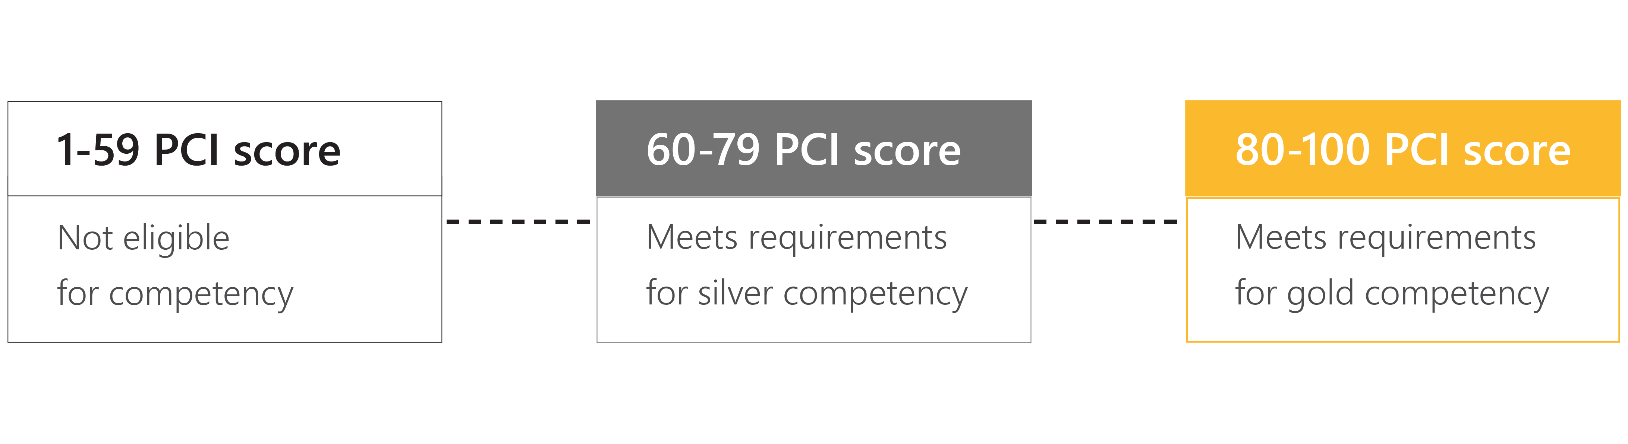 Shows PCI scores to achieve Silver or Gold competency.